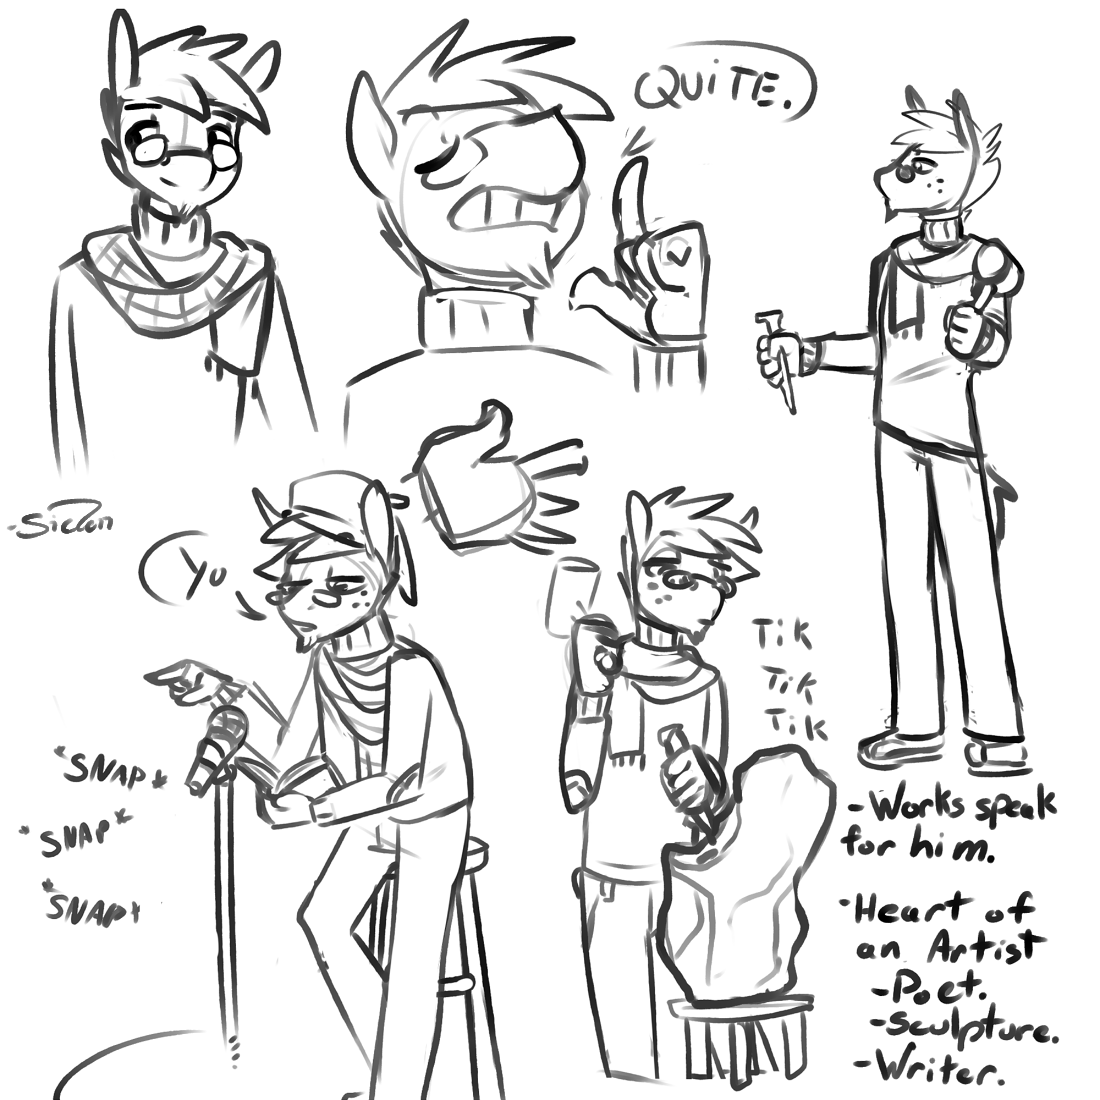 More silly doodles of this silly au, this time with extended family.Okay so, Starting